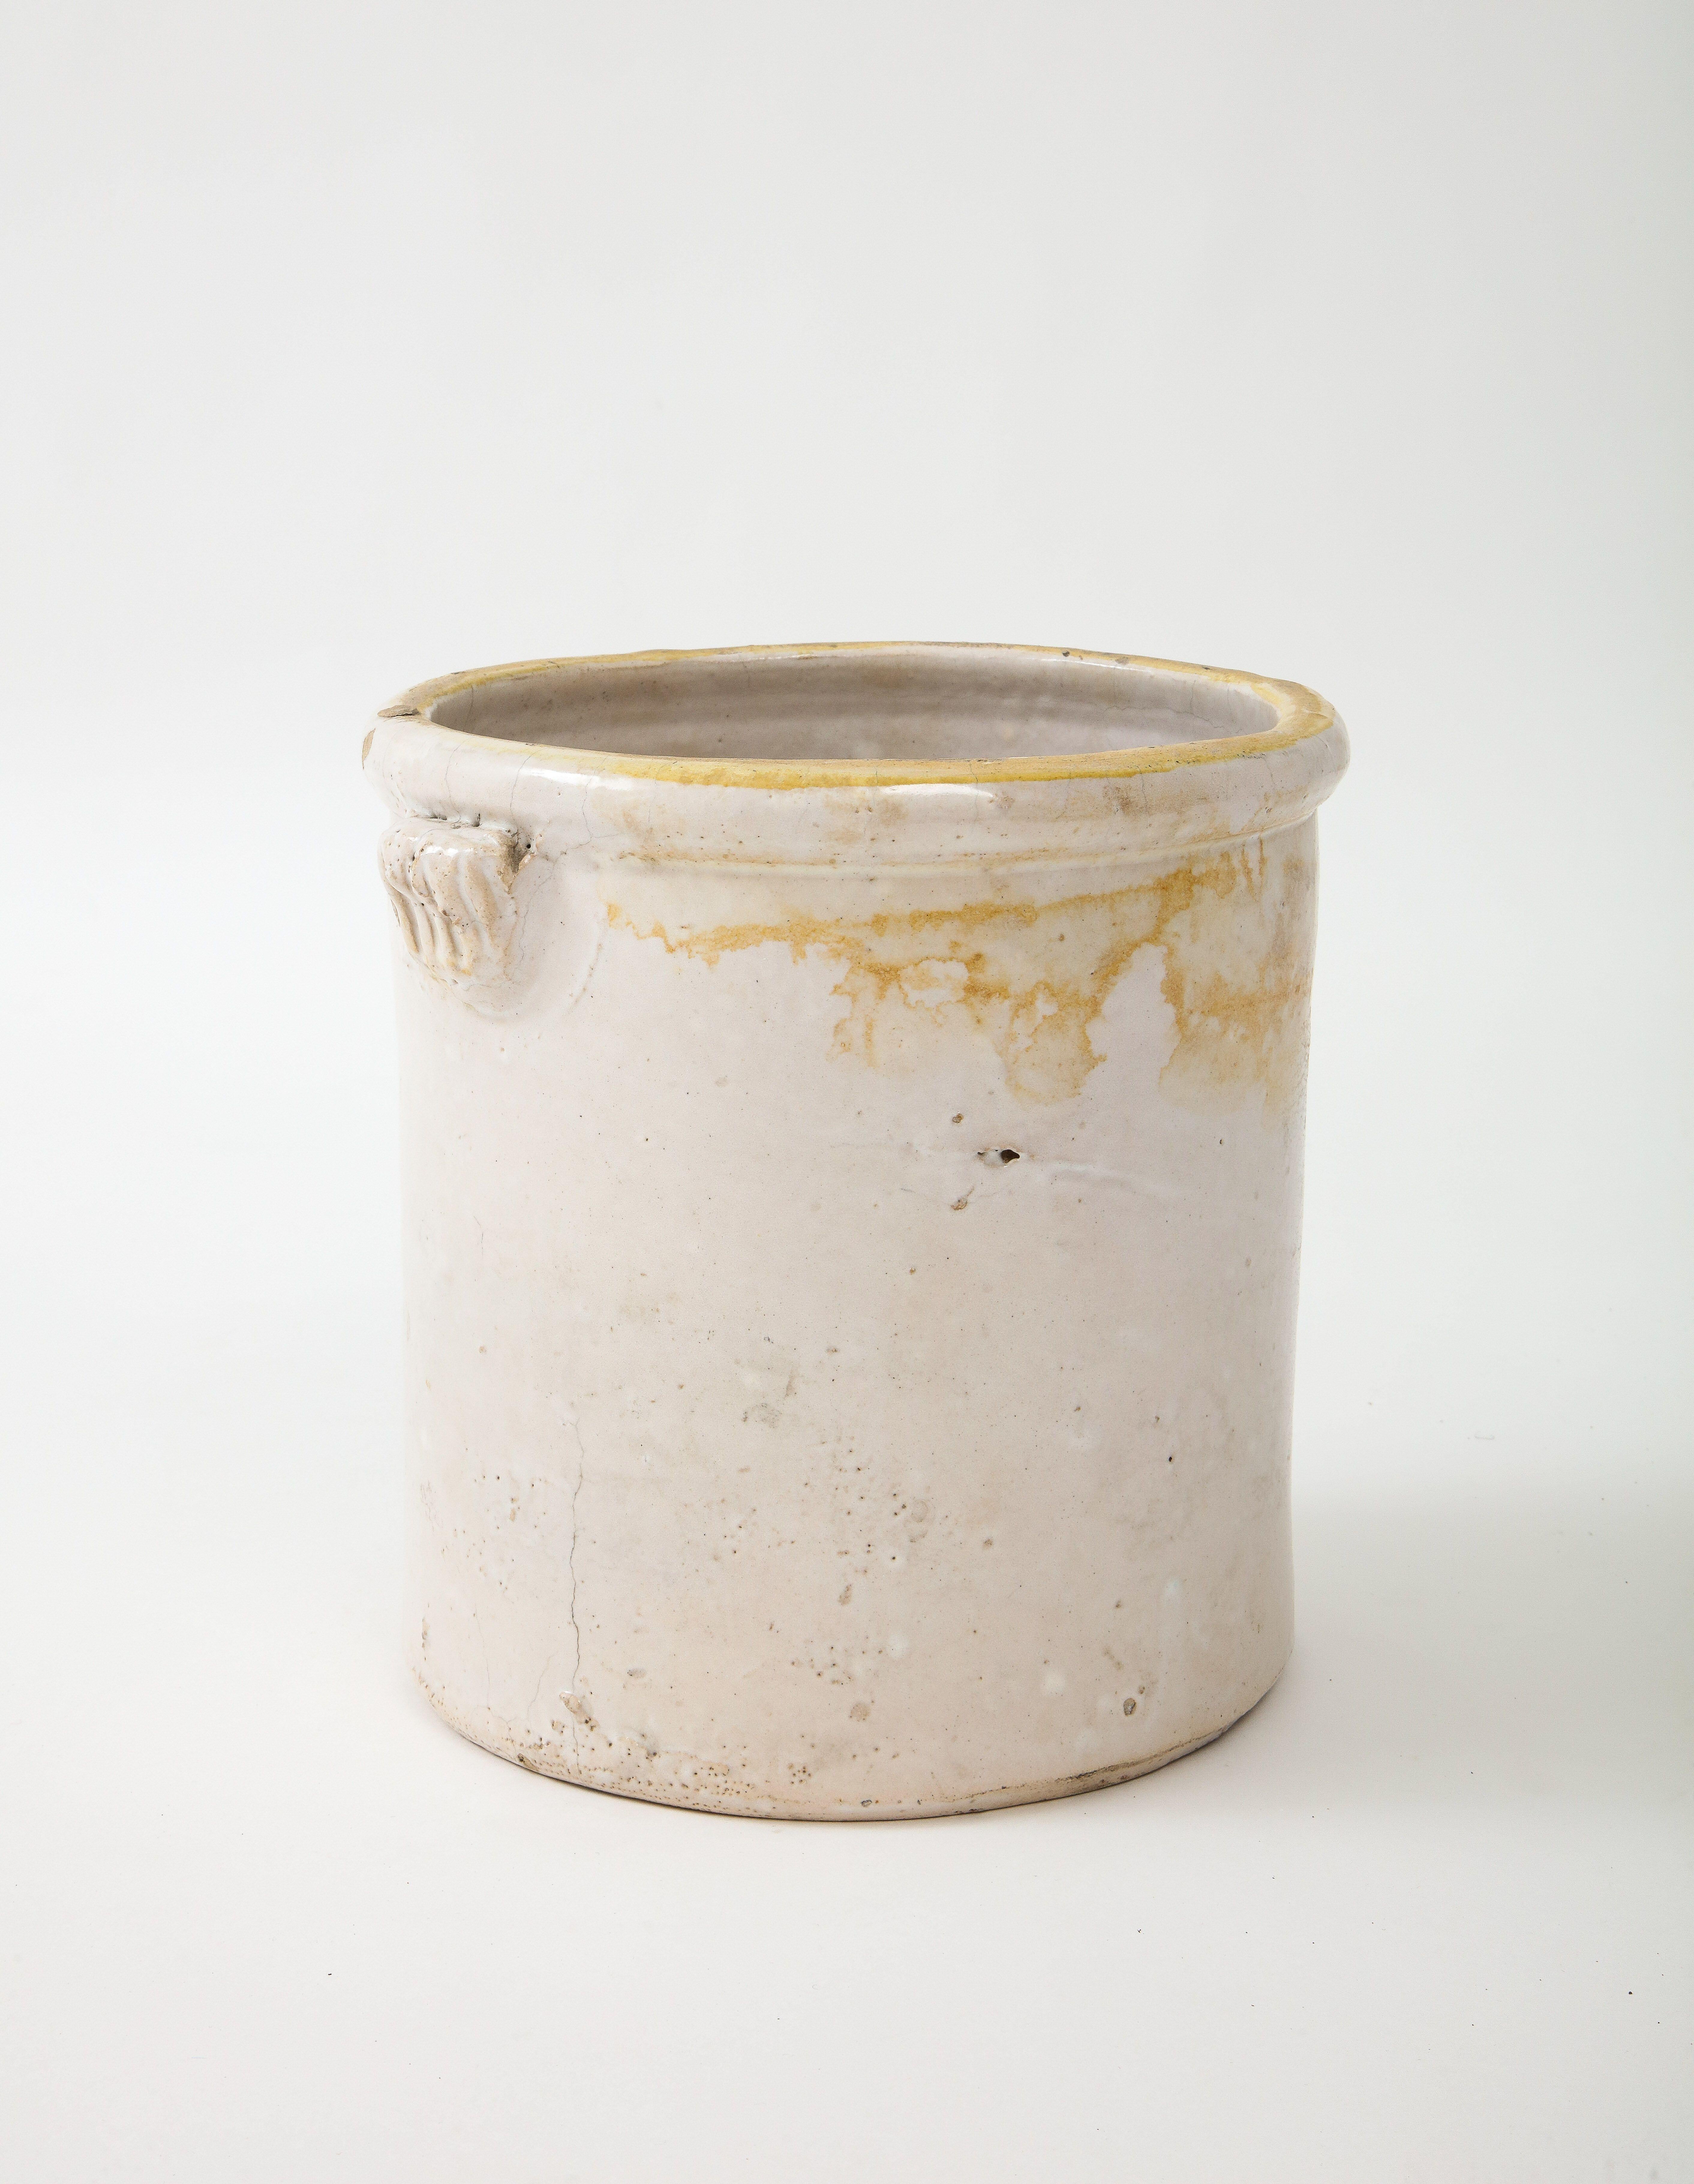 19th Century French confit pot or jar. Handcrafted and with the traditional two handles. Originally used to store and preserve food.